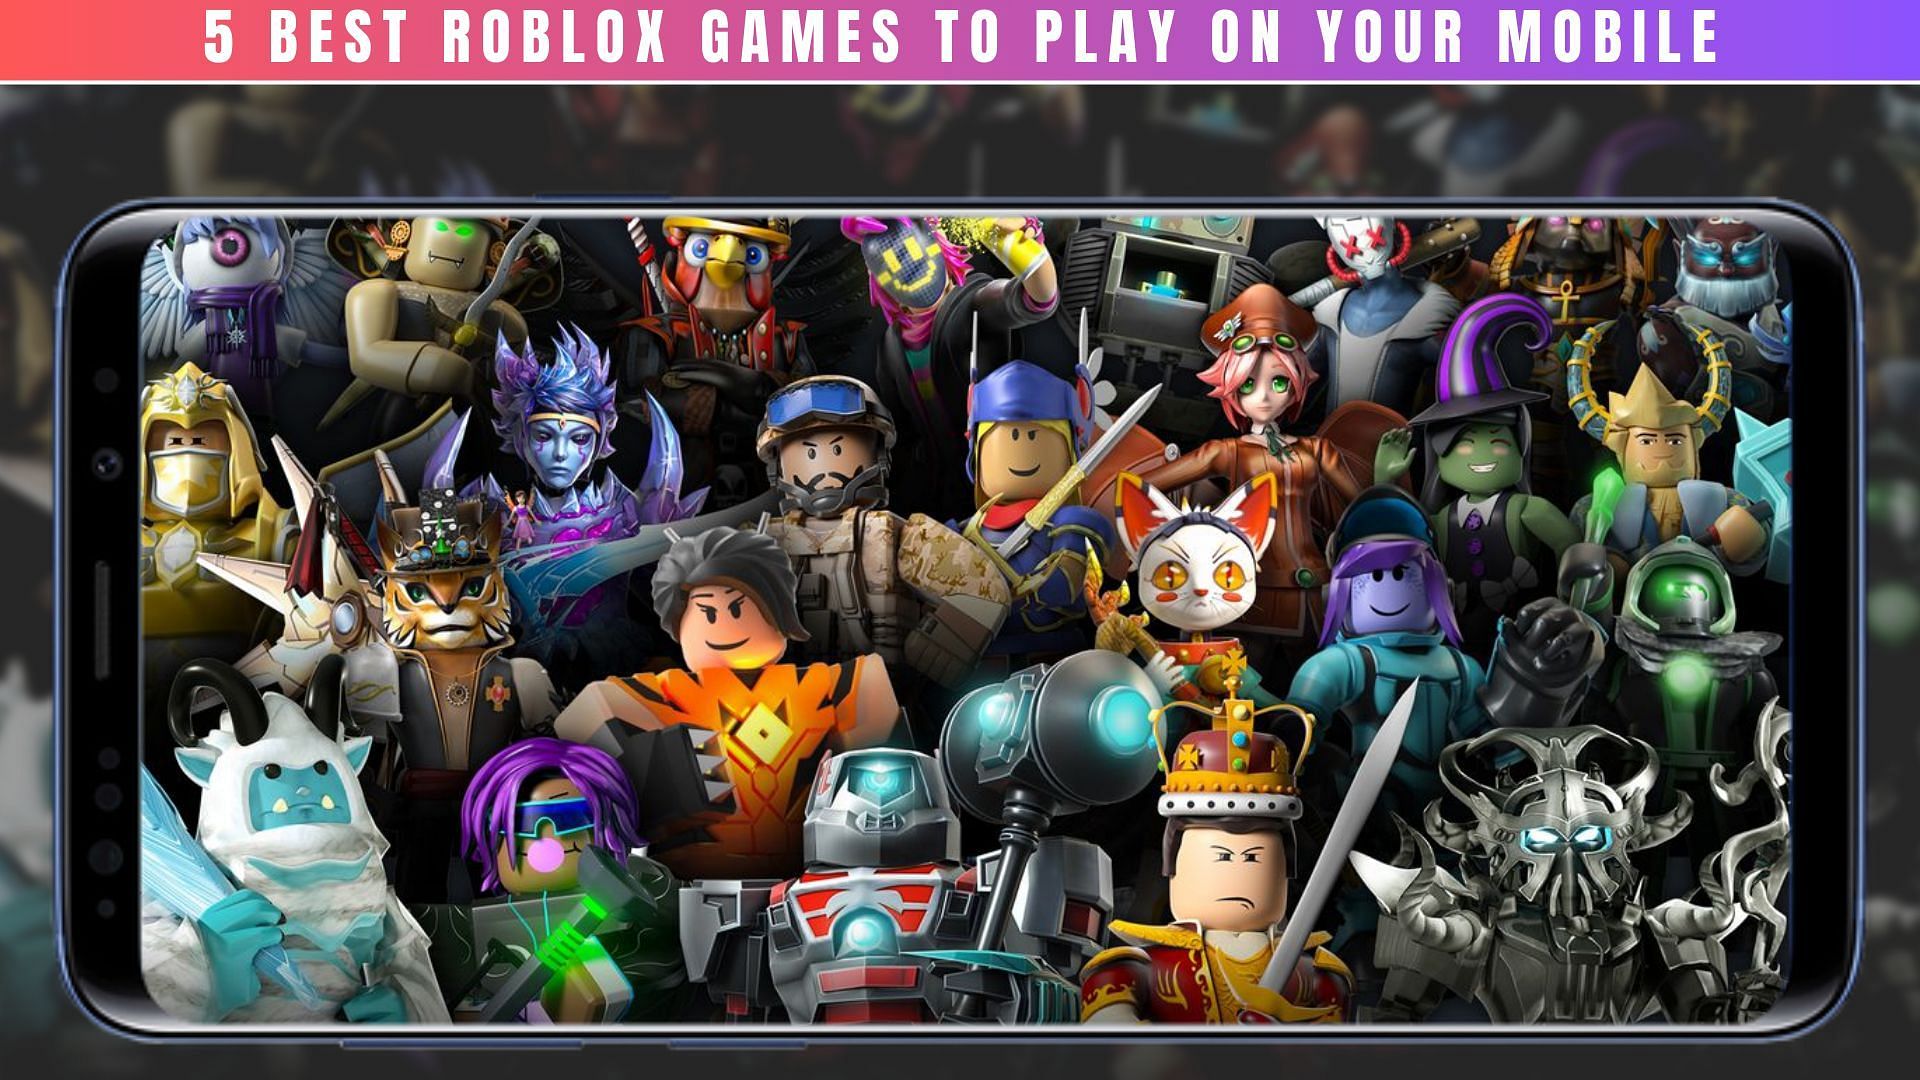 5 best Roblox games to play on your mobile